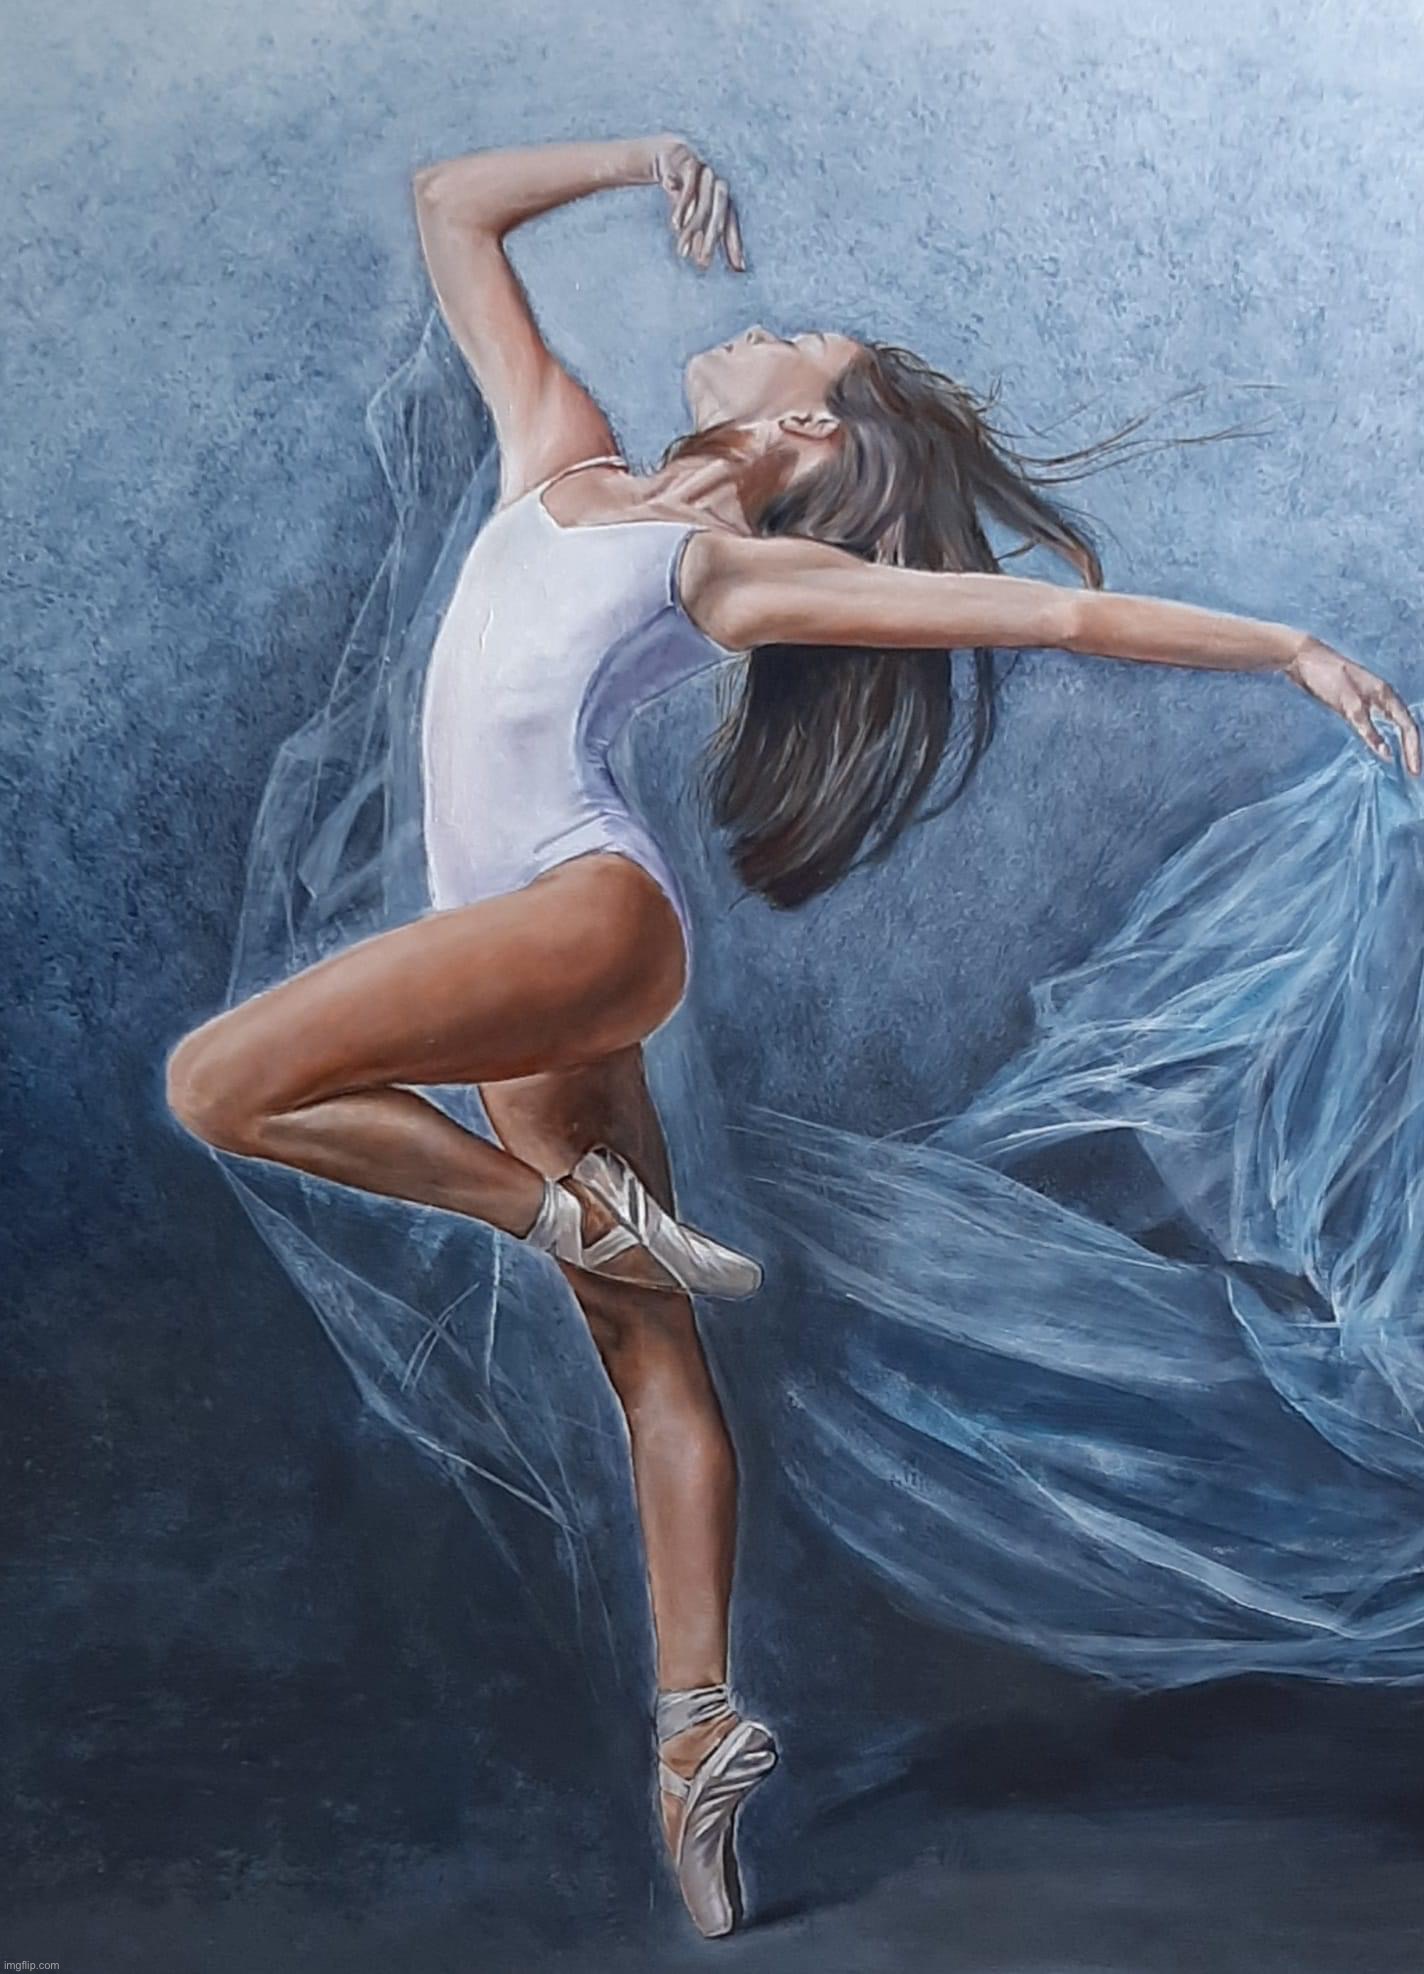 Dancer painting | image tagged in dancer painting | made w/ Imgflip meme maker